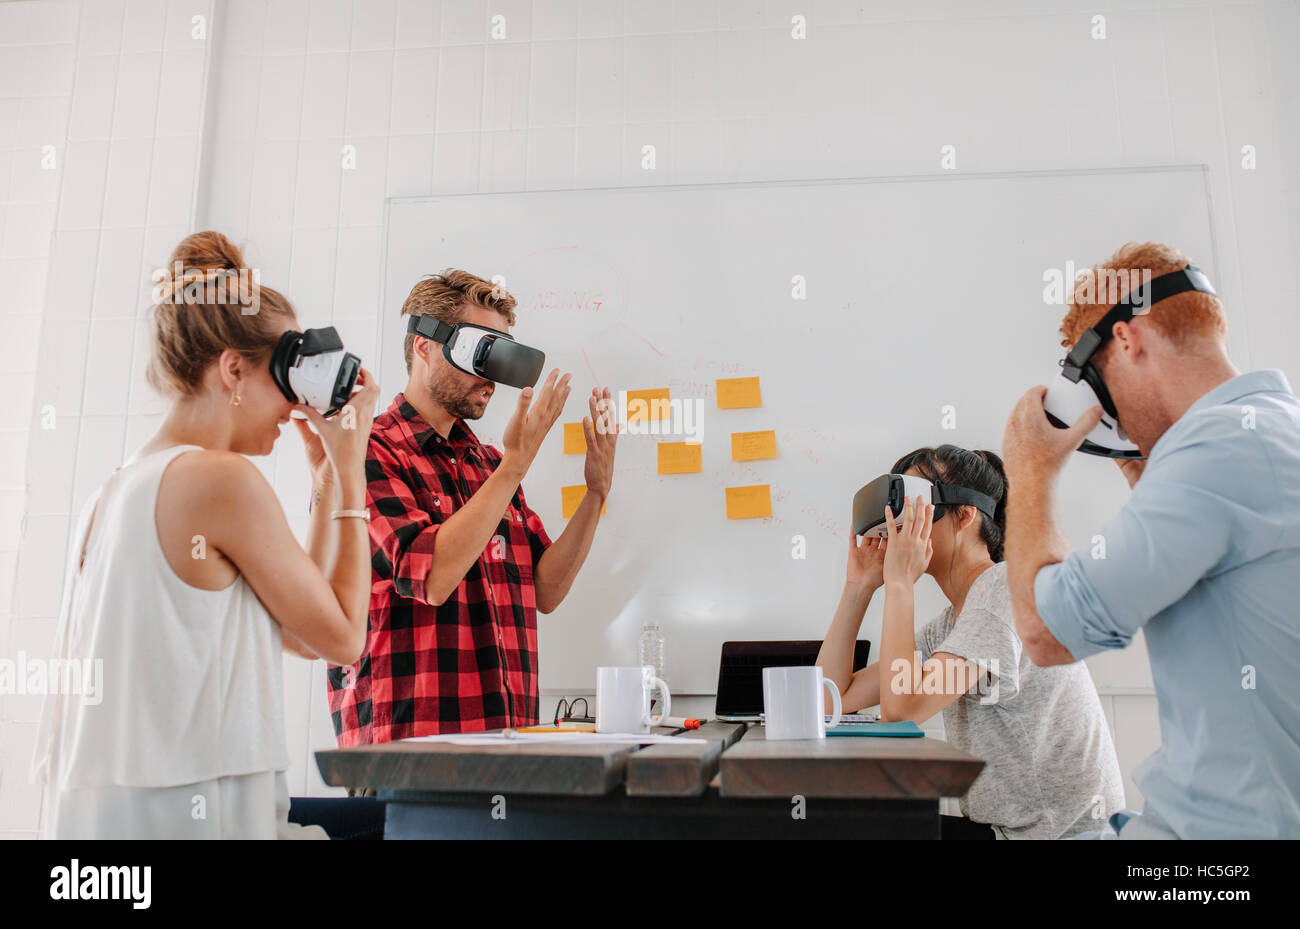 Business people using virtual reality goggles in meeting in office. Team of developers testing virtual reality headset. Stock Photo